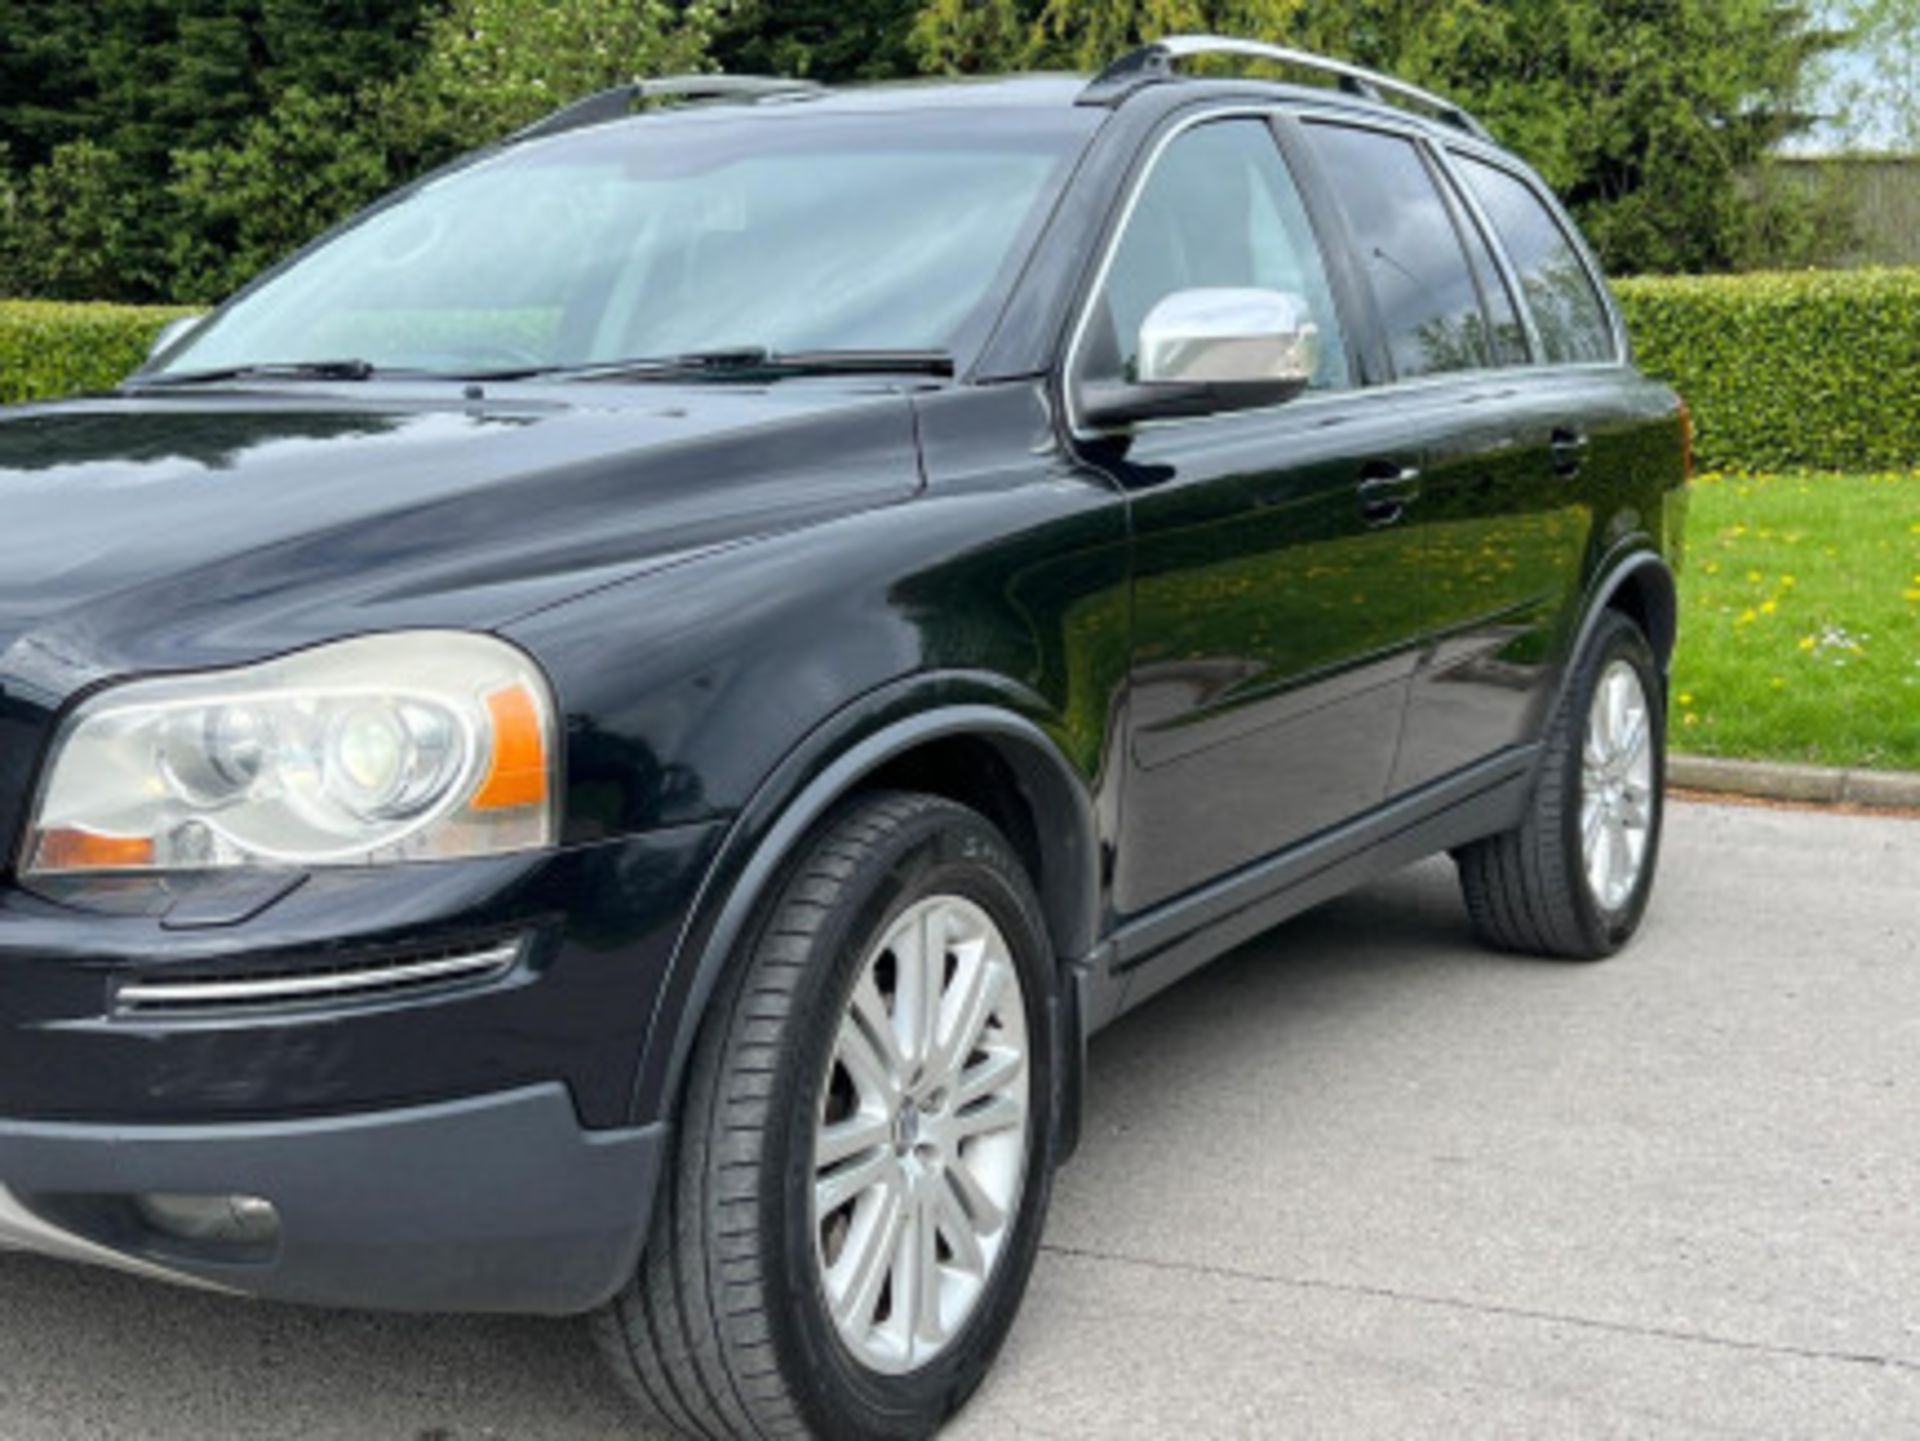 VOLVO XC90 2.4 D5 EXECUTIVE GEARTRONIC AWD, 5DR >>--NO VAT ON HAMMER--<< - Image 56 of 136